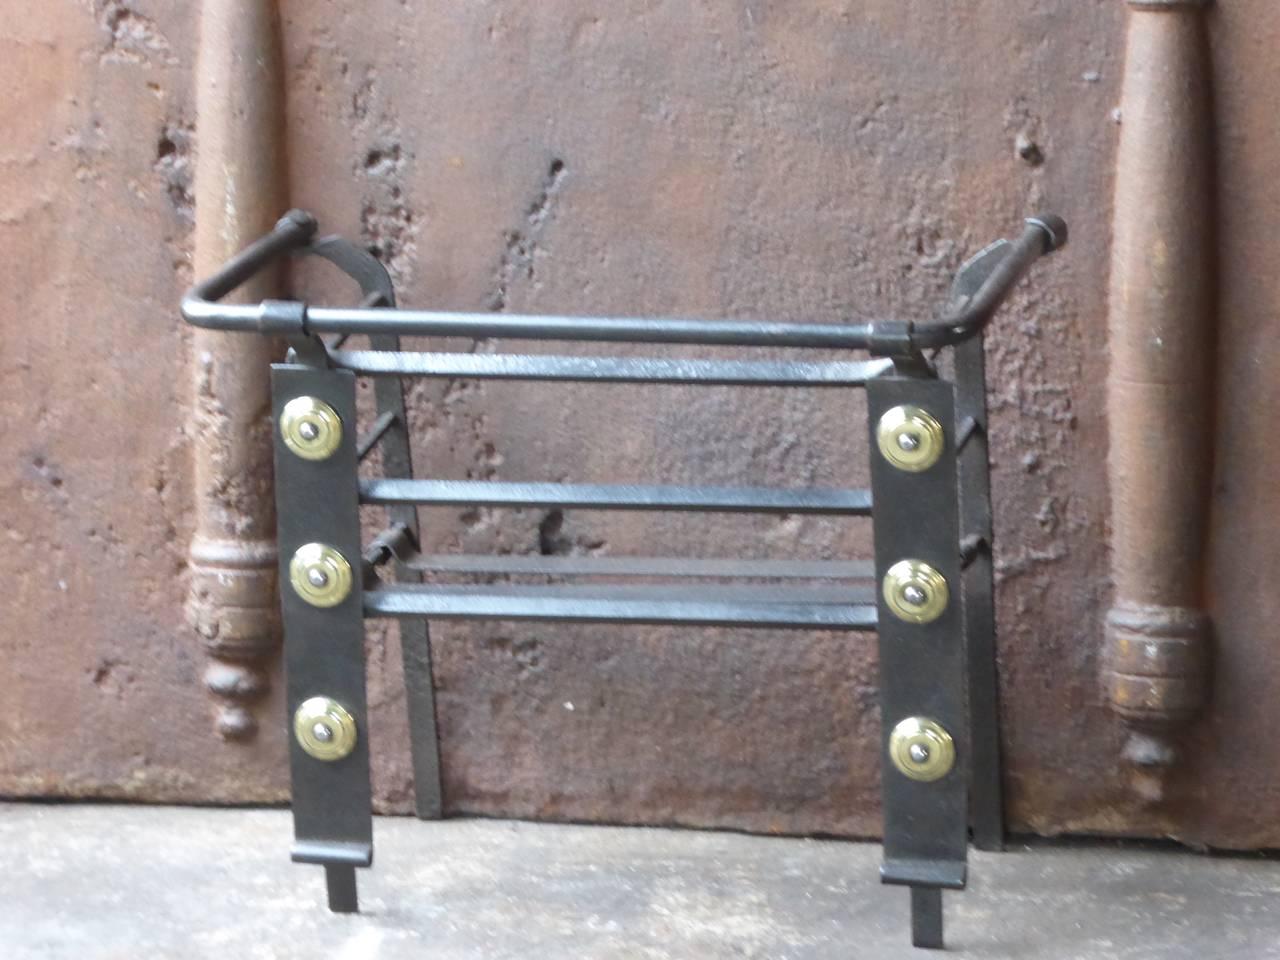 18th century Dutch fire grate made of wrought iron and brass.

We have a unique and specialized collection of antique and used fireplace accessories consisting of more than 1000 listings at 1stdibs. Amongst others, we always have 300+ firebacks,